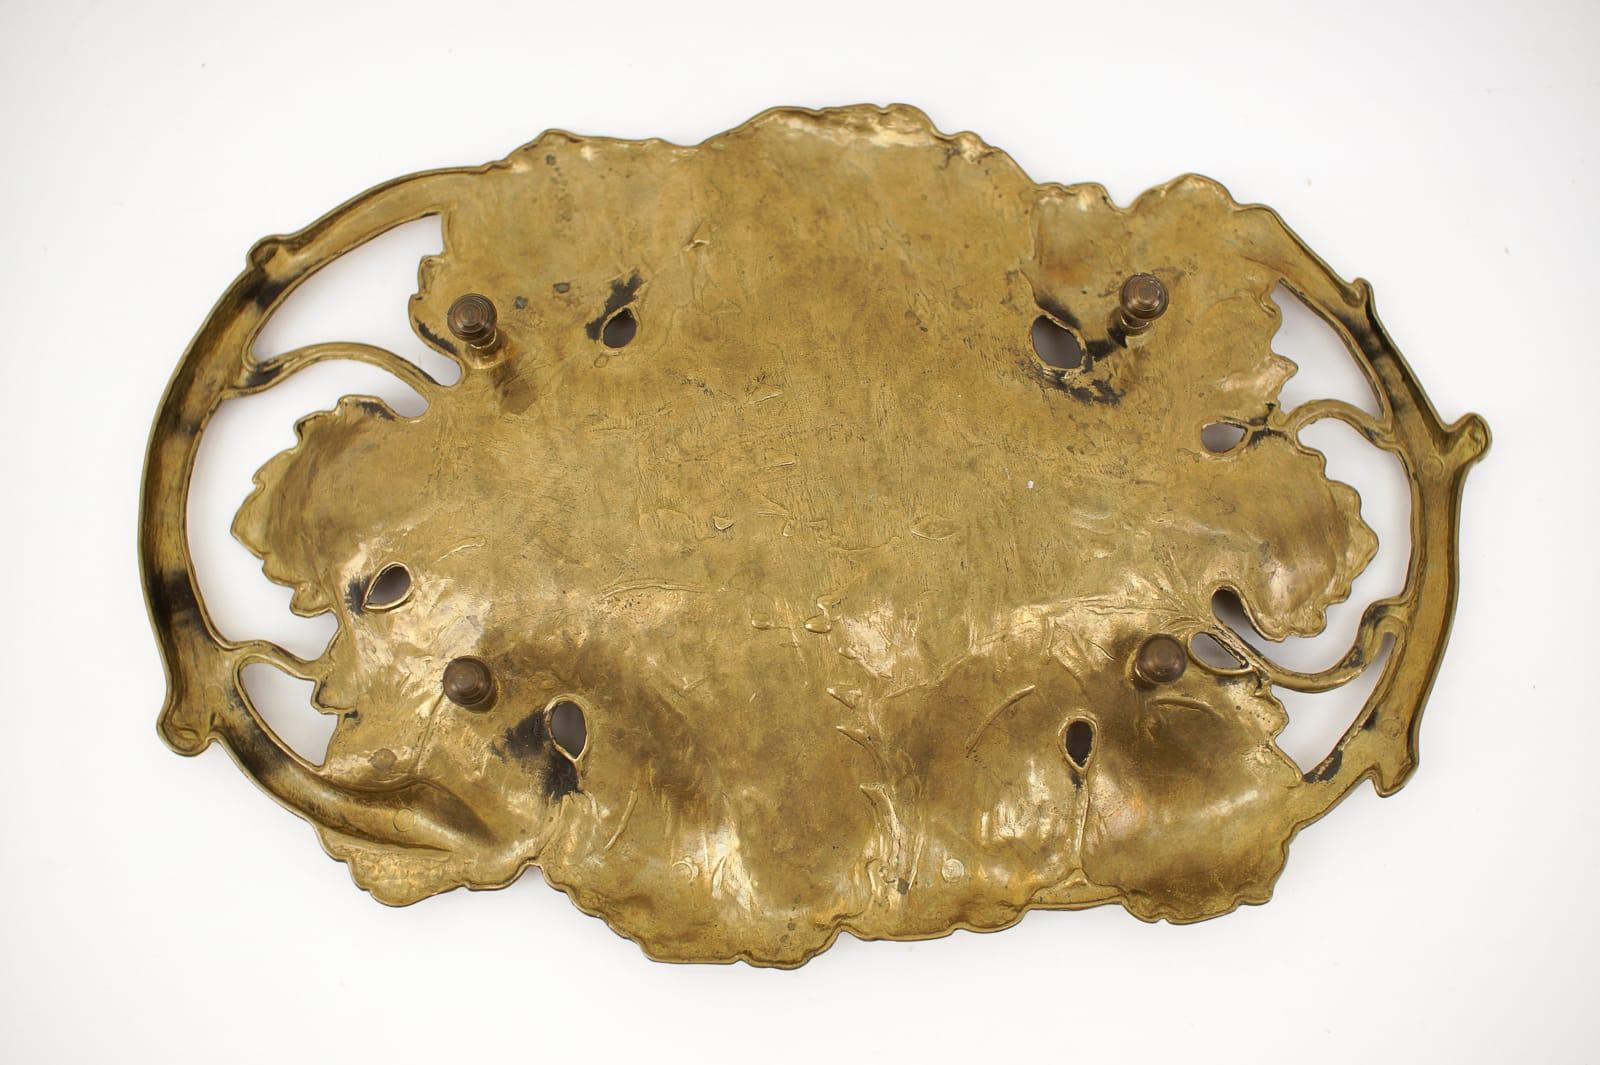 Two Vine Leaves Hand Formed into a Solid Brass Bowl, 1960s For Sale 3